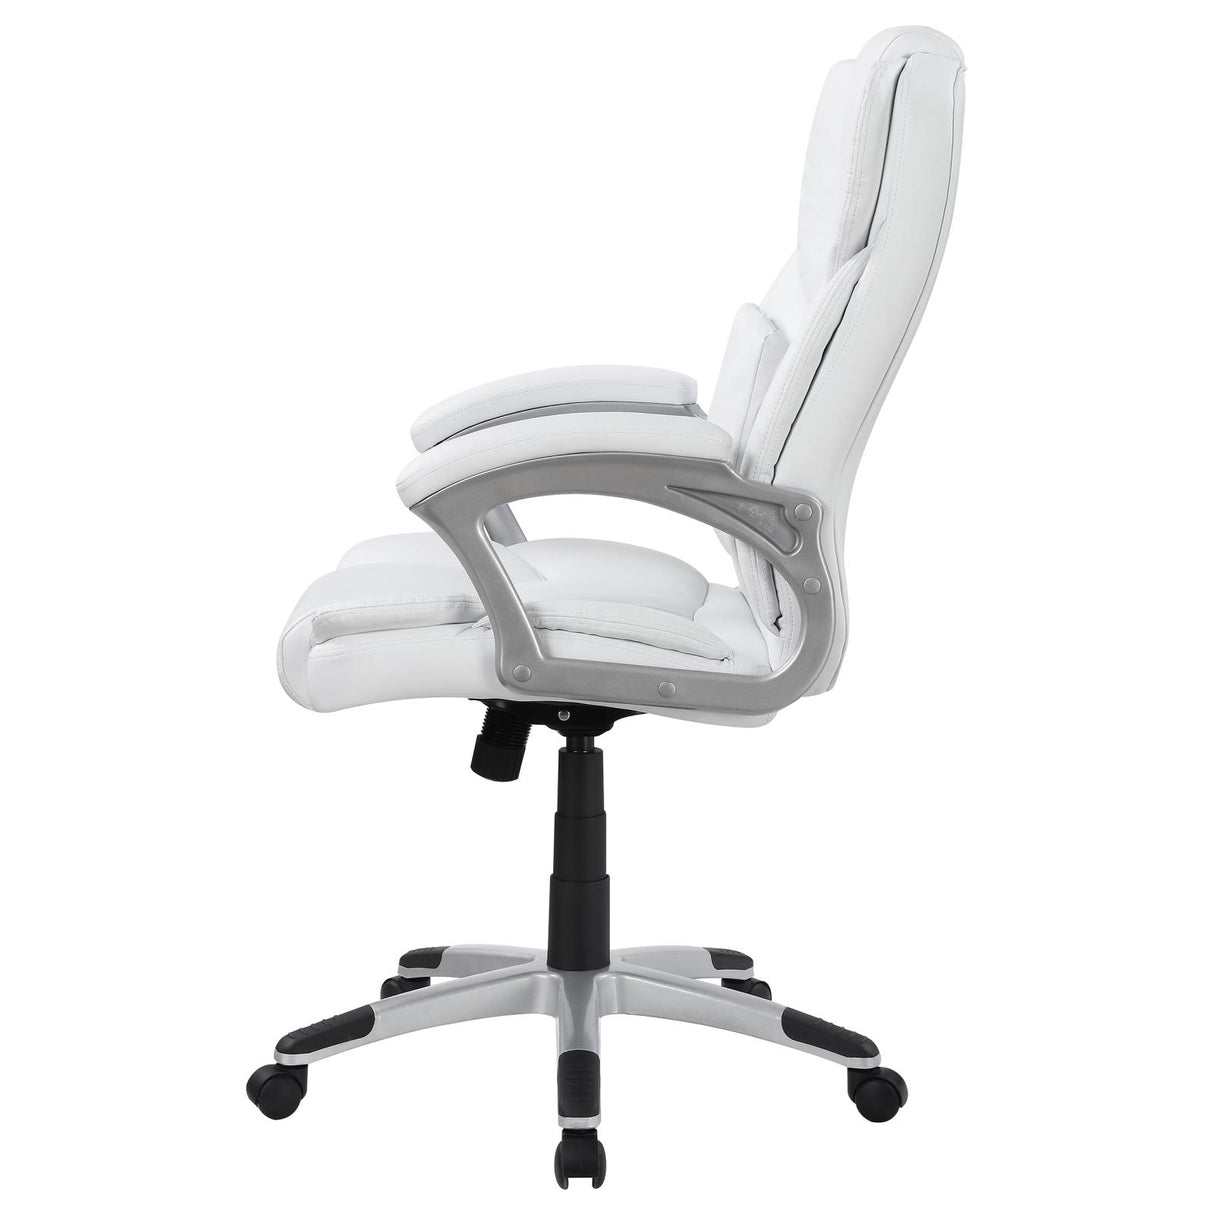 Kaffir Adjustable Height Office Chair White and Silver - 801140 - Luna Furniture